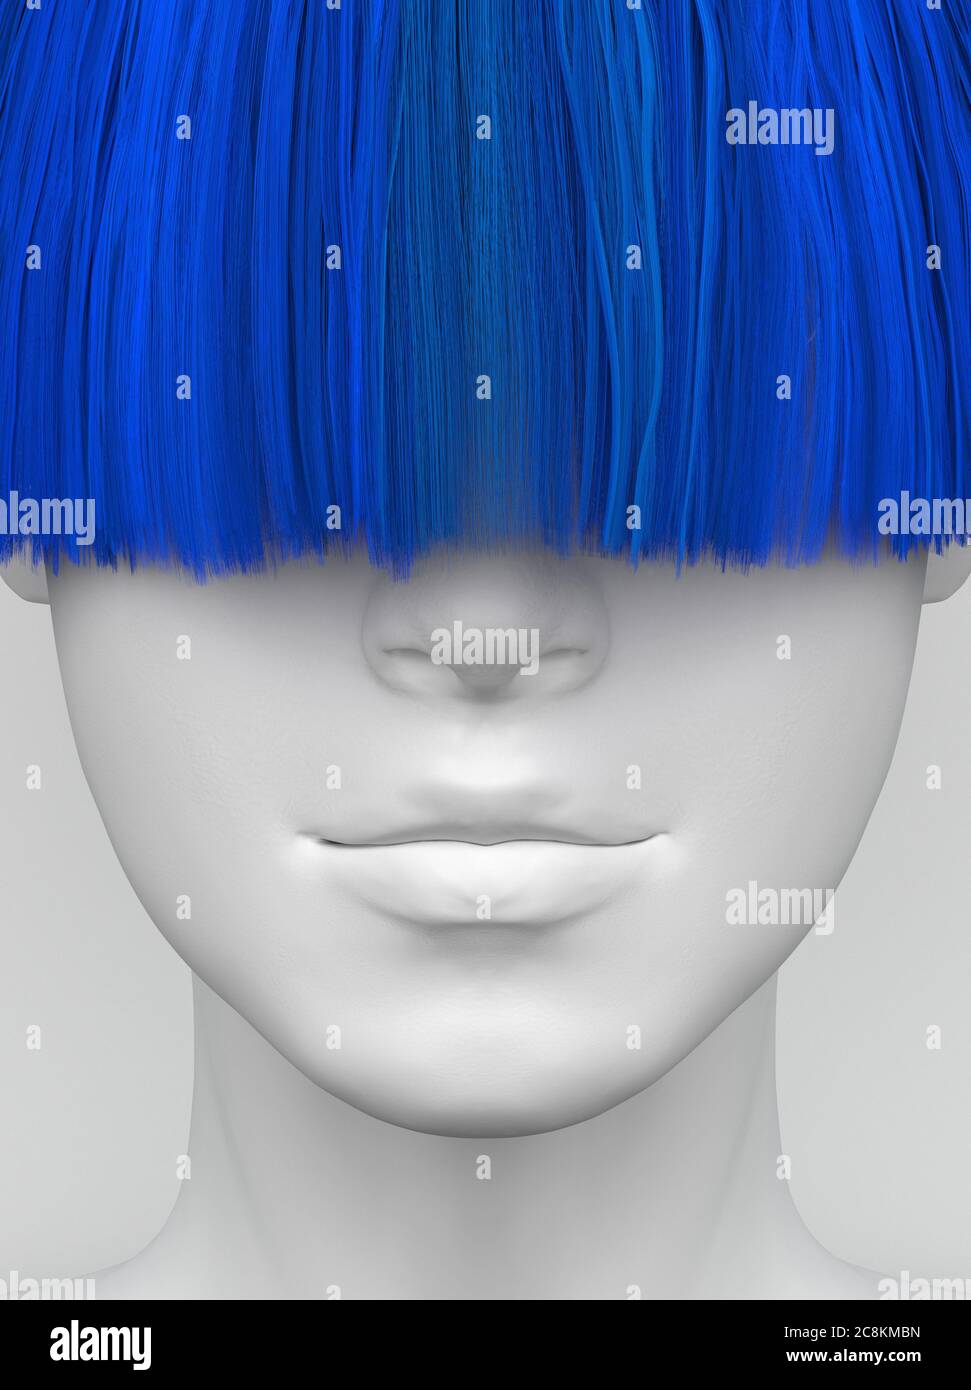 White female face with long blue bangs covering her eyes. Bright colorful hair. Creative conceptual illustration. 3D render Stock Photo